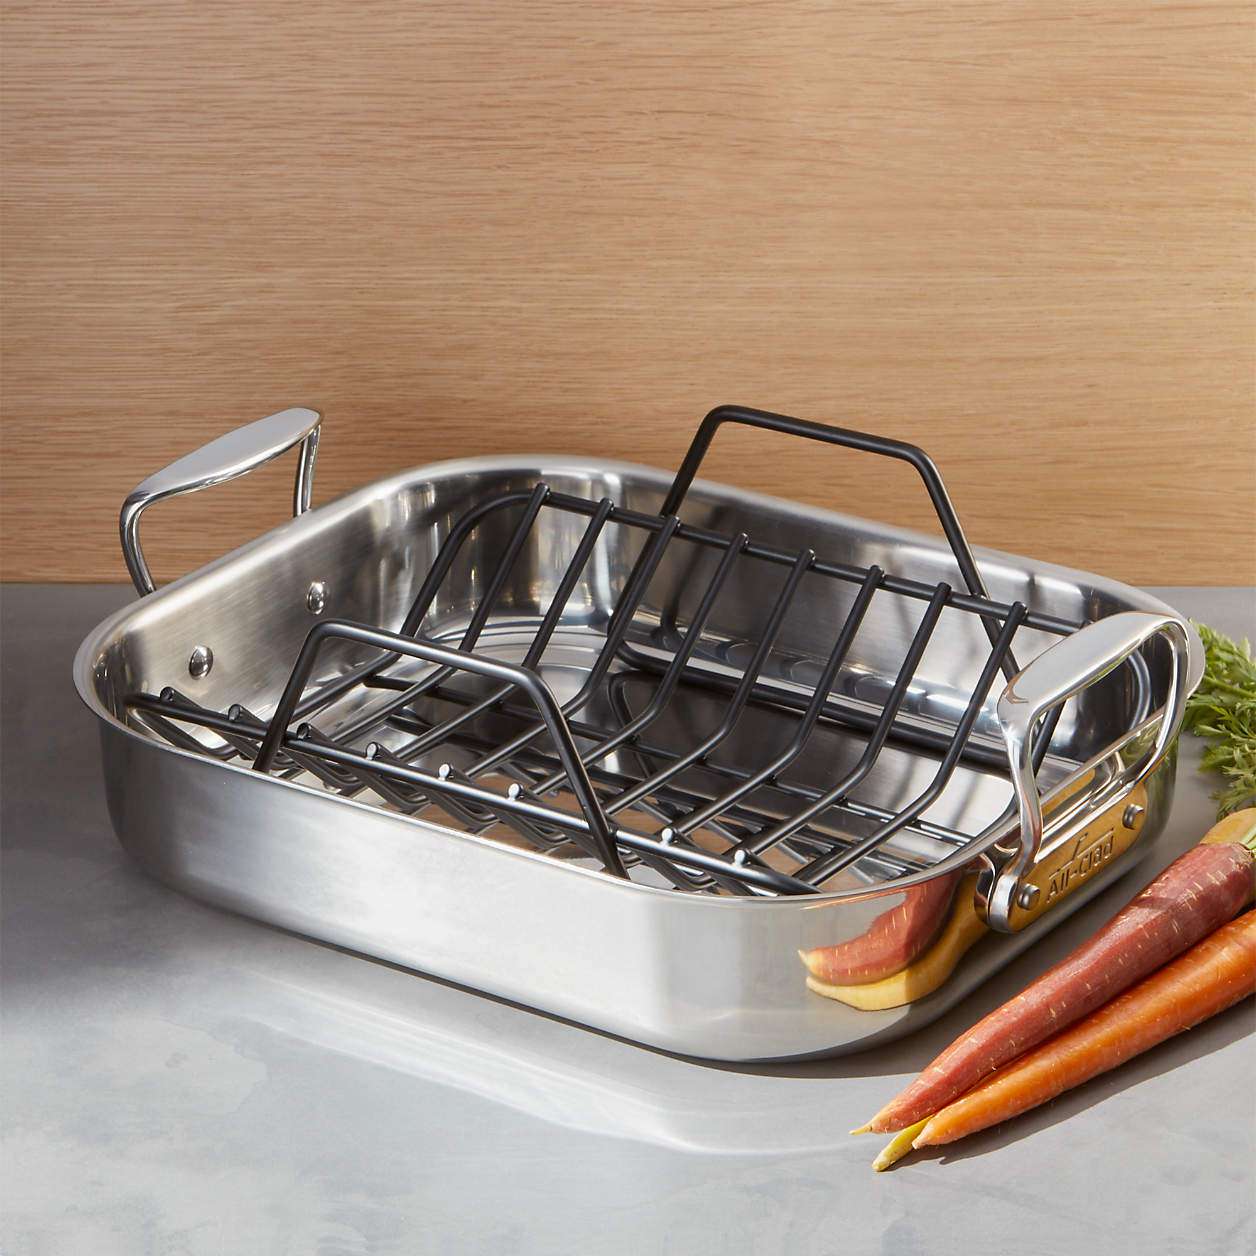 All-Clad Small Stainless Steel 14.5" Roasting Pan with Rack